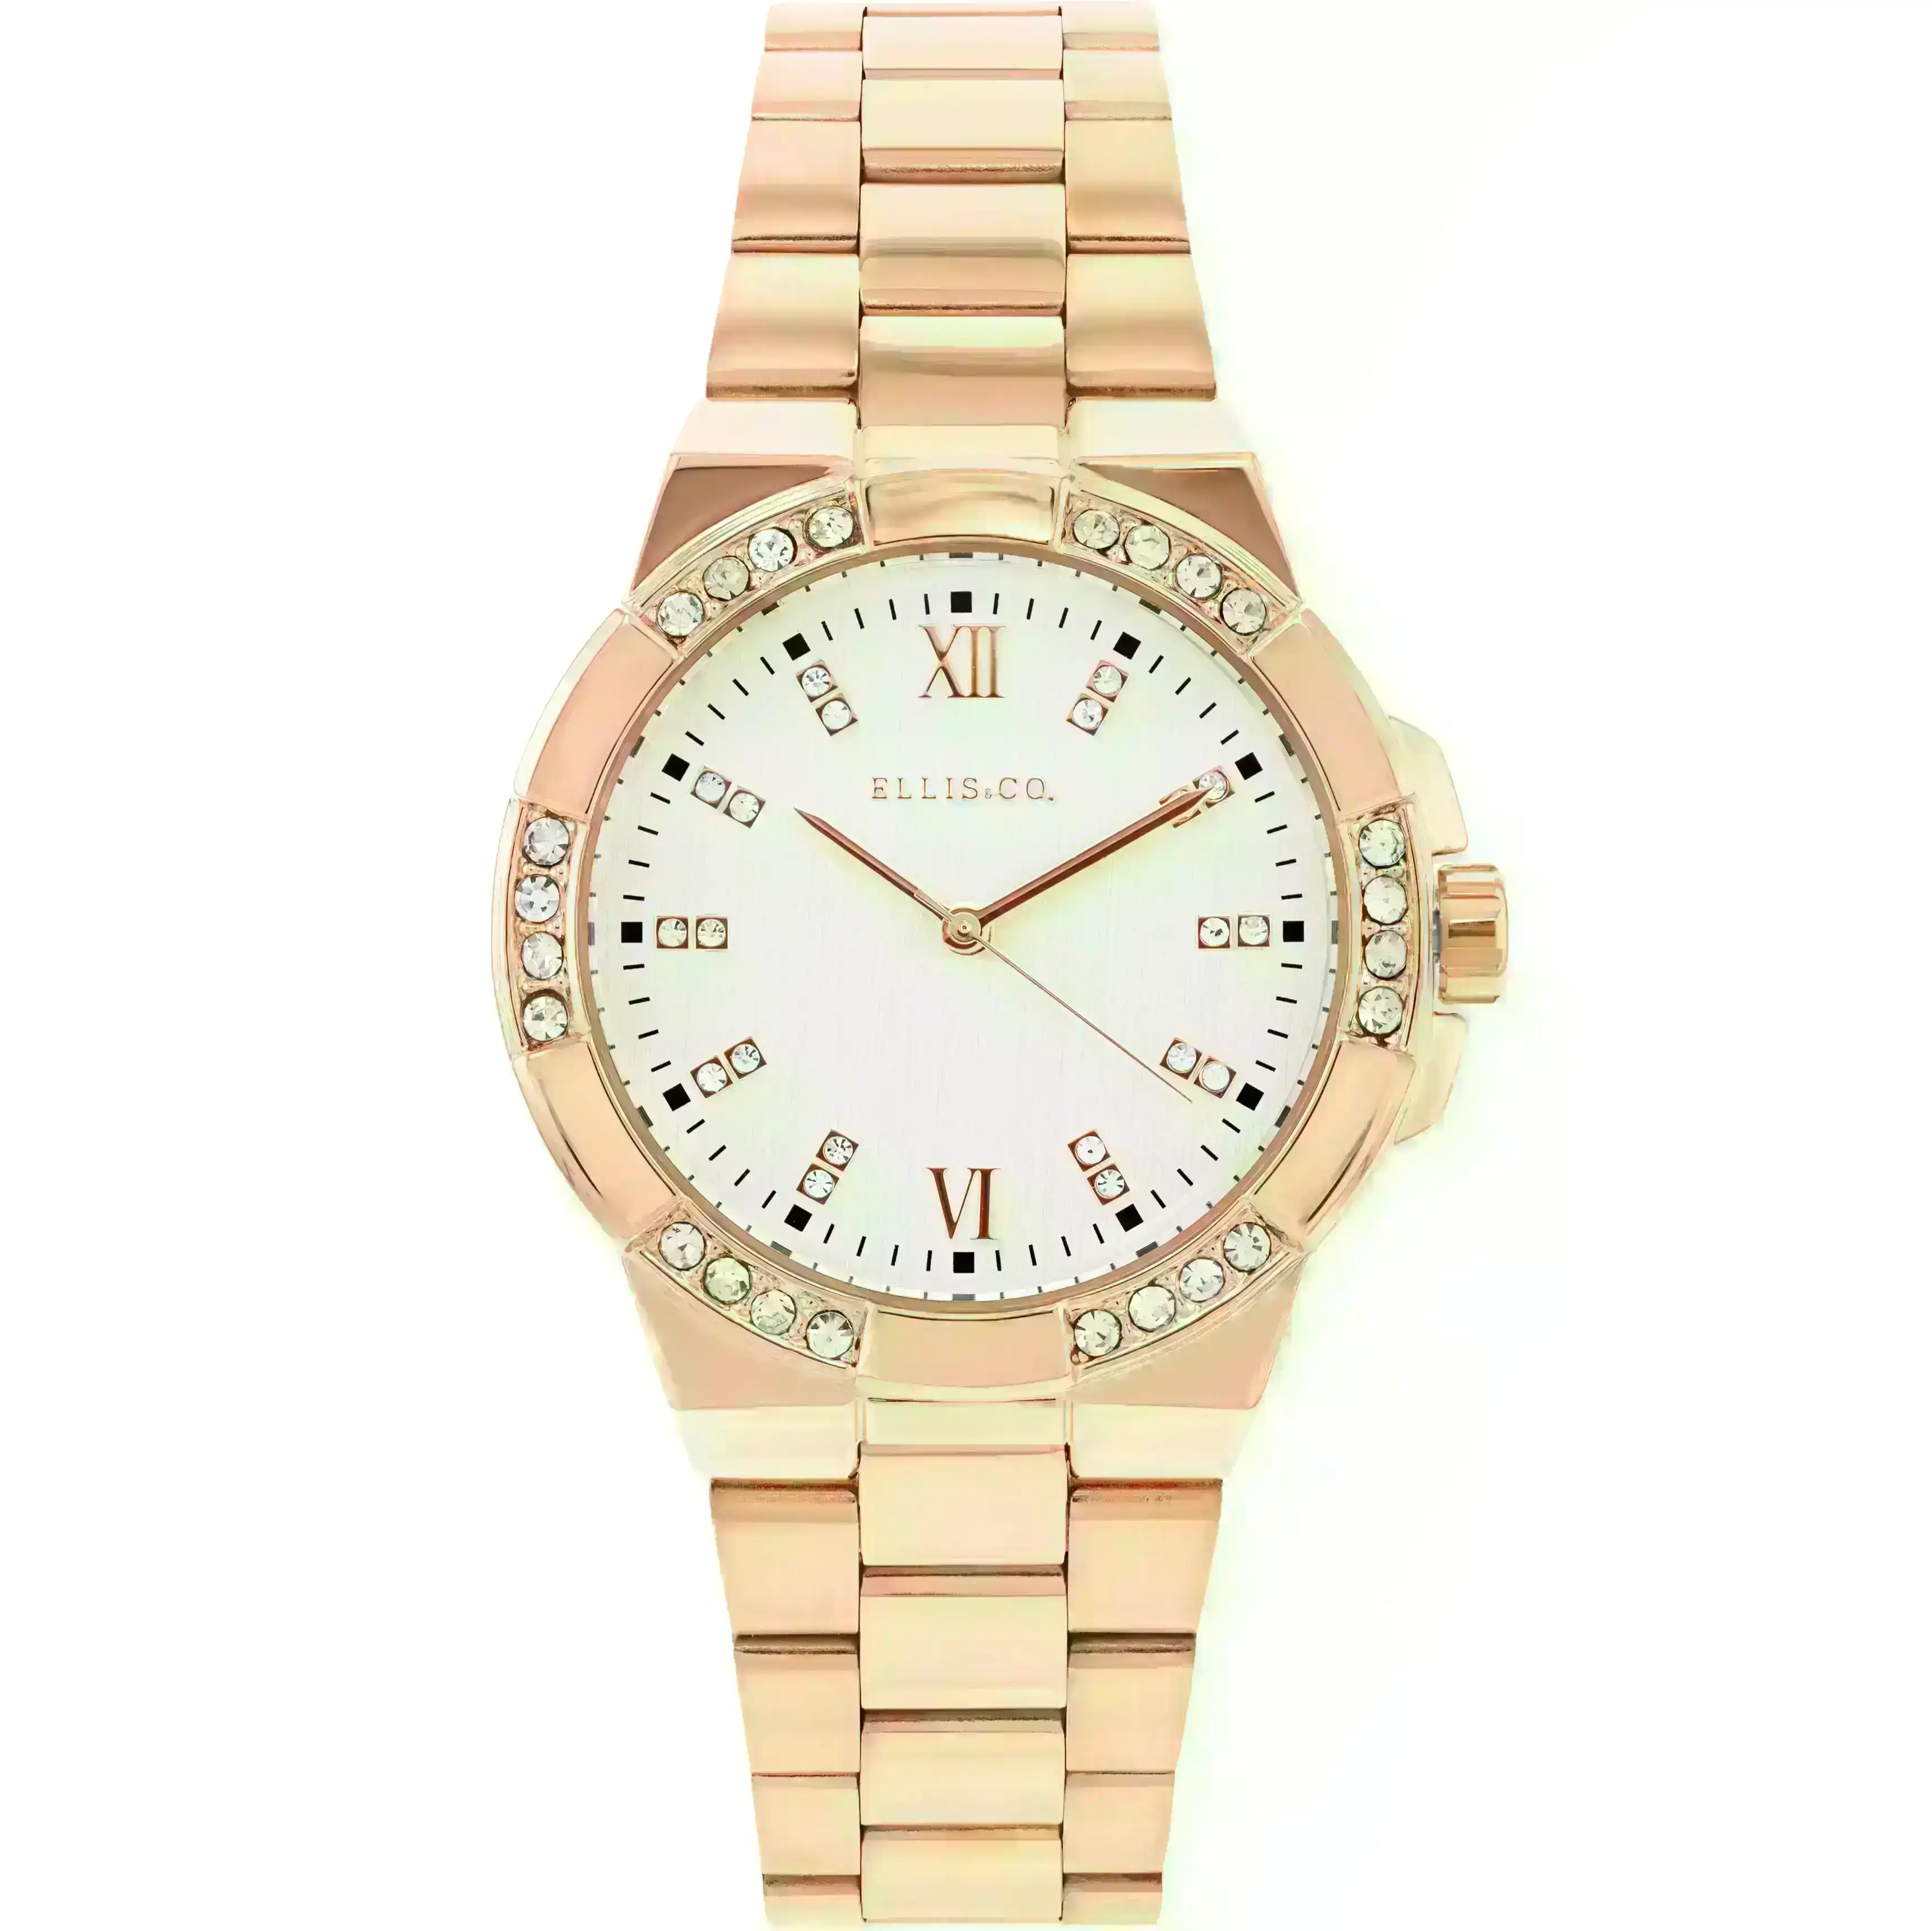 Ellis & Co 'Alyse' Rose Gold Plated Women's Watch